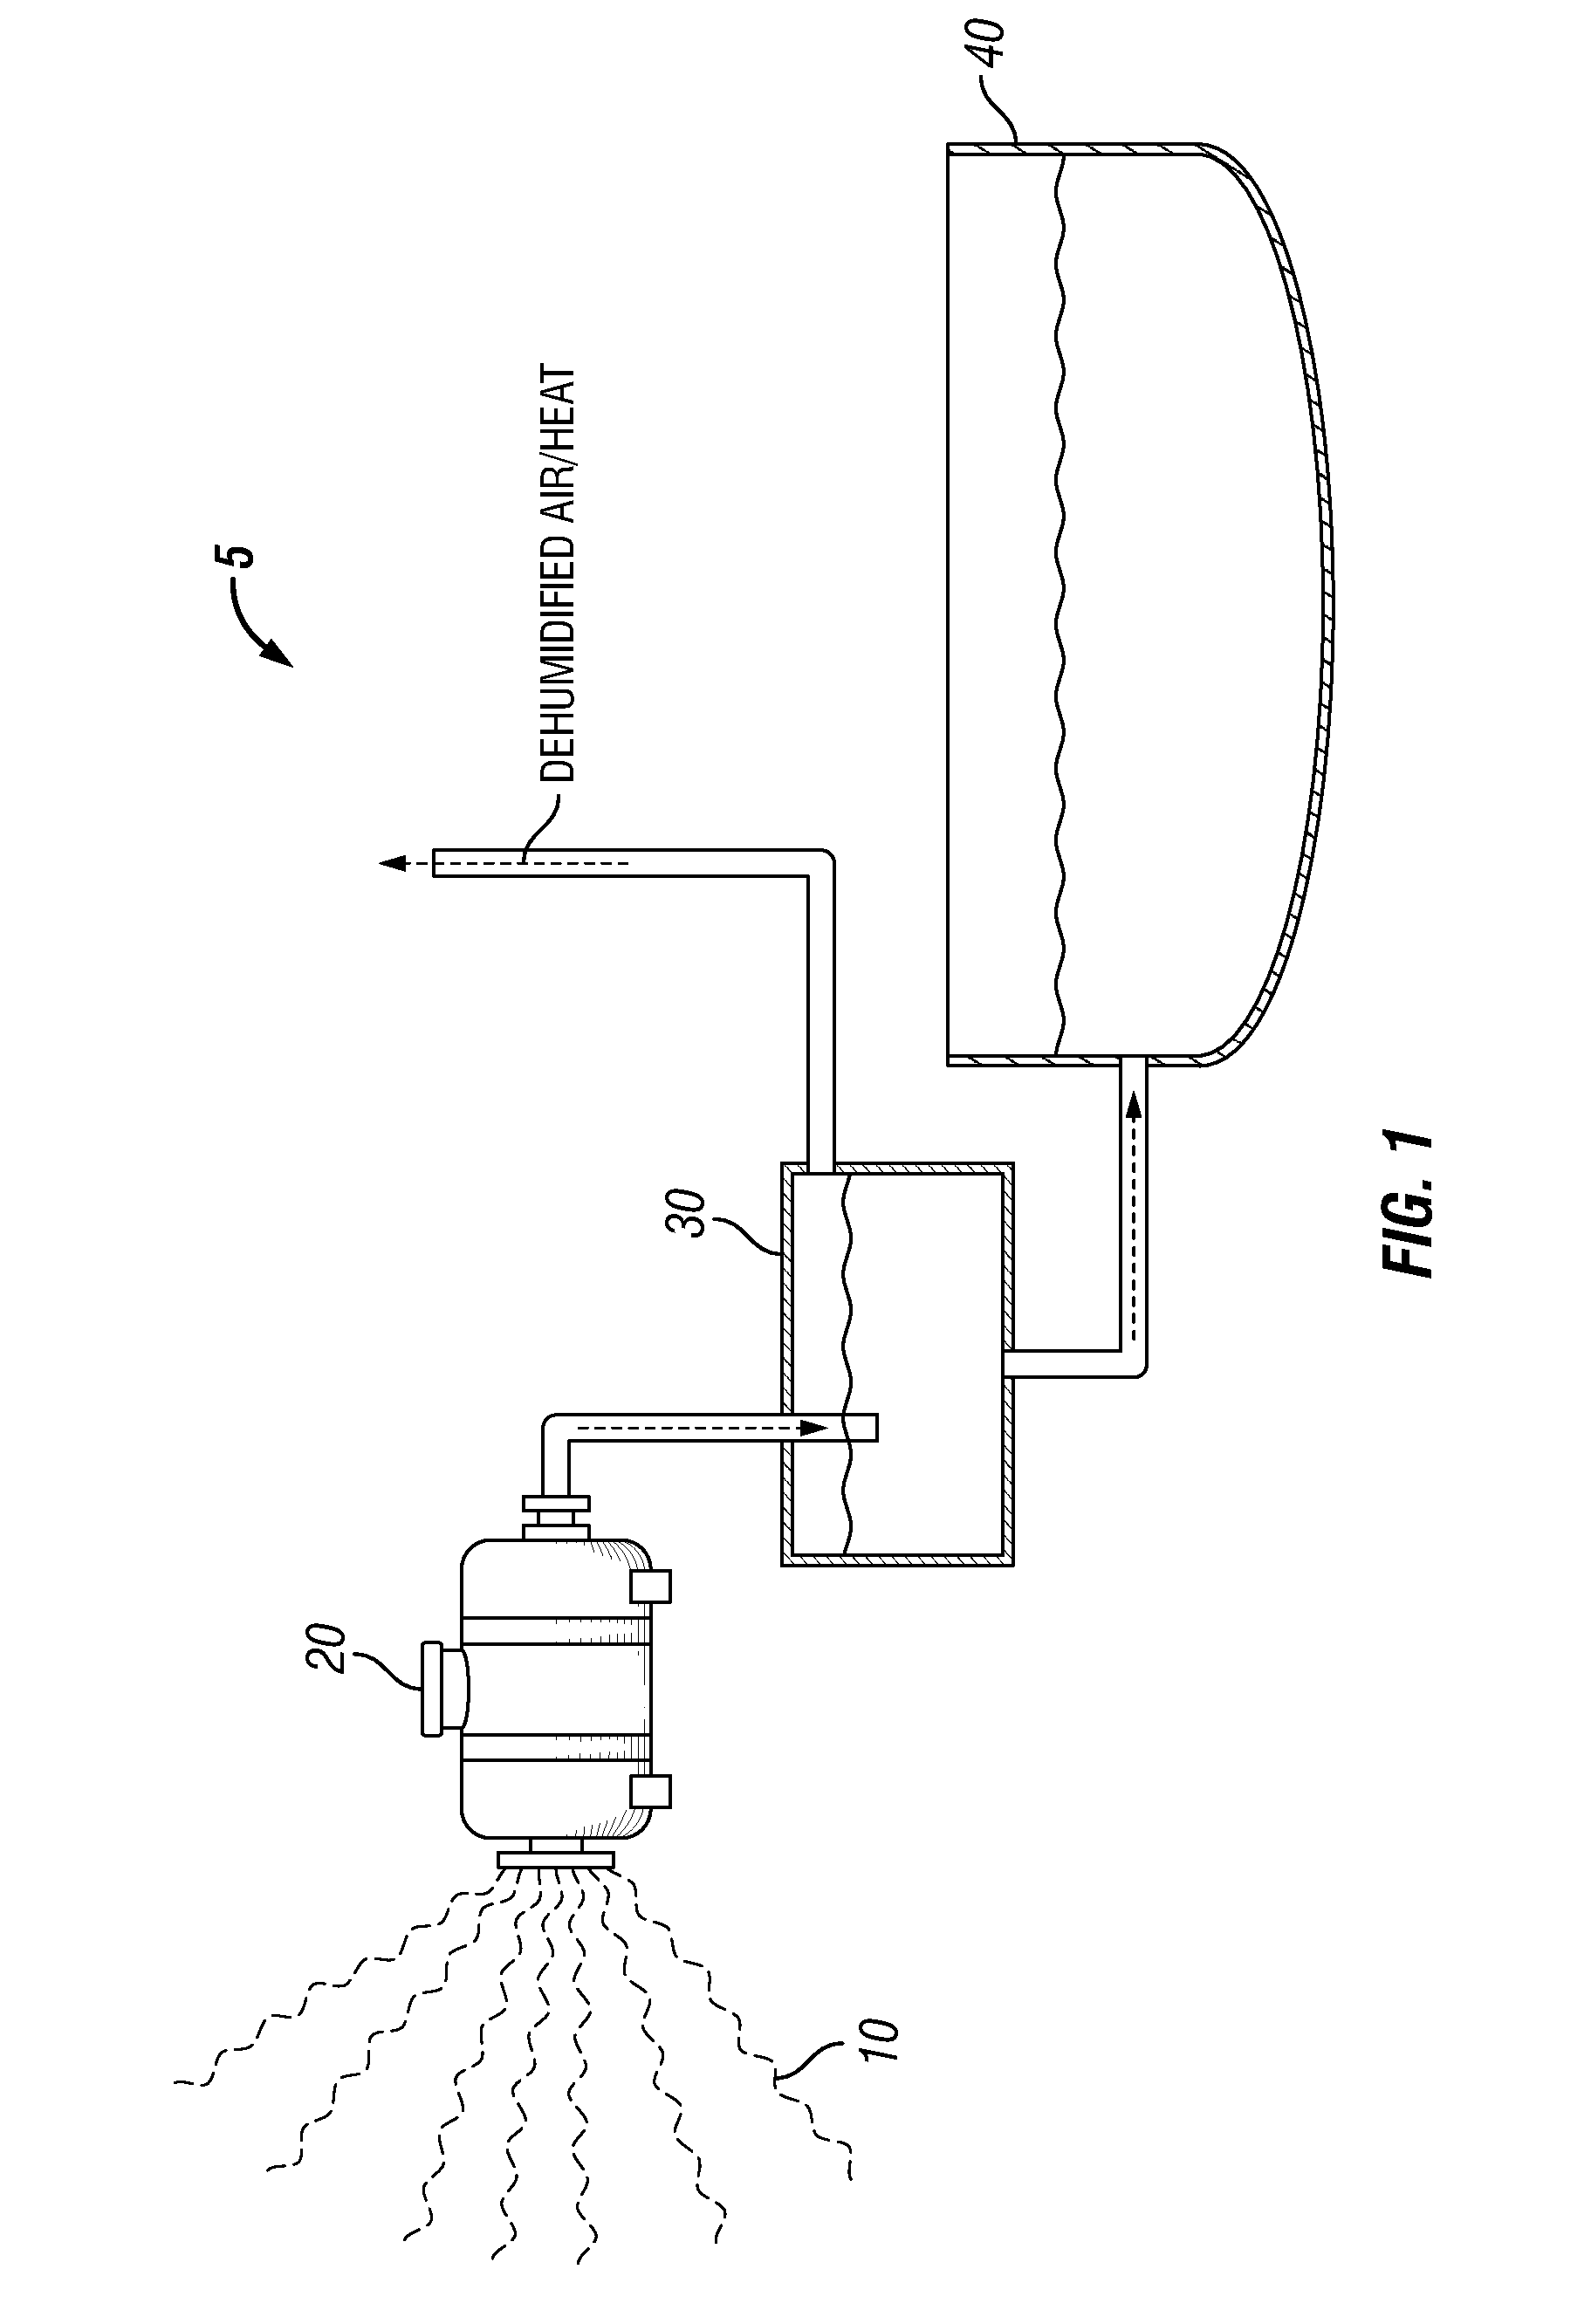 Process for Water Treatment and Generation